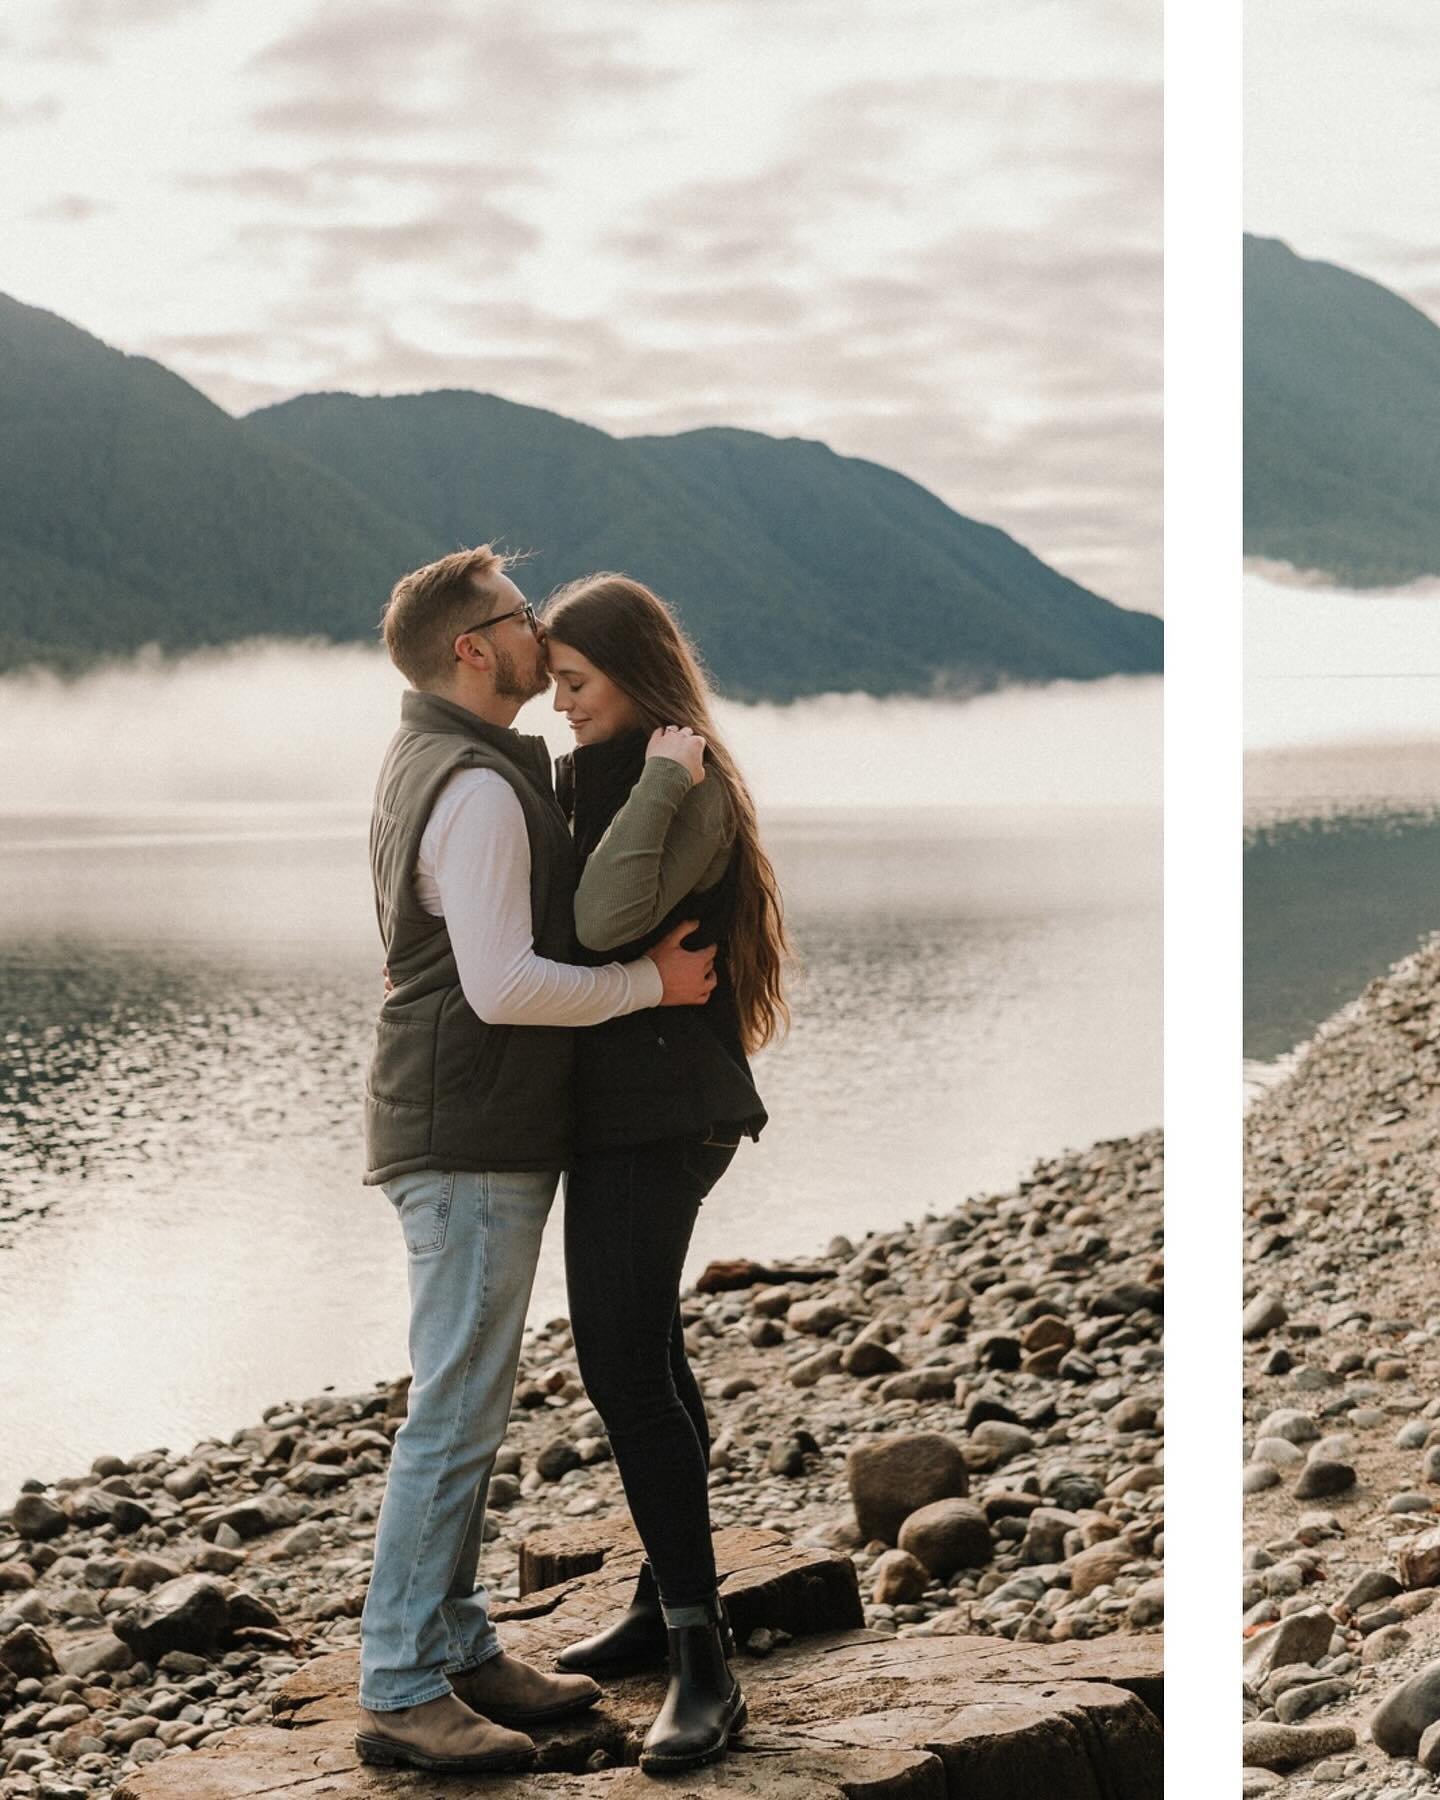 We start our busy summer season with these two in just a few weeks, we can&rsquo;t wait!

We&rsquo;re also keeping busy chatting with 2025 couples who are in the planning process. If you&rsquo;re on the hunt for a photographer (or any vendor for that